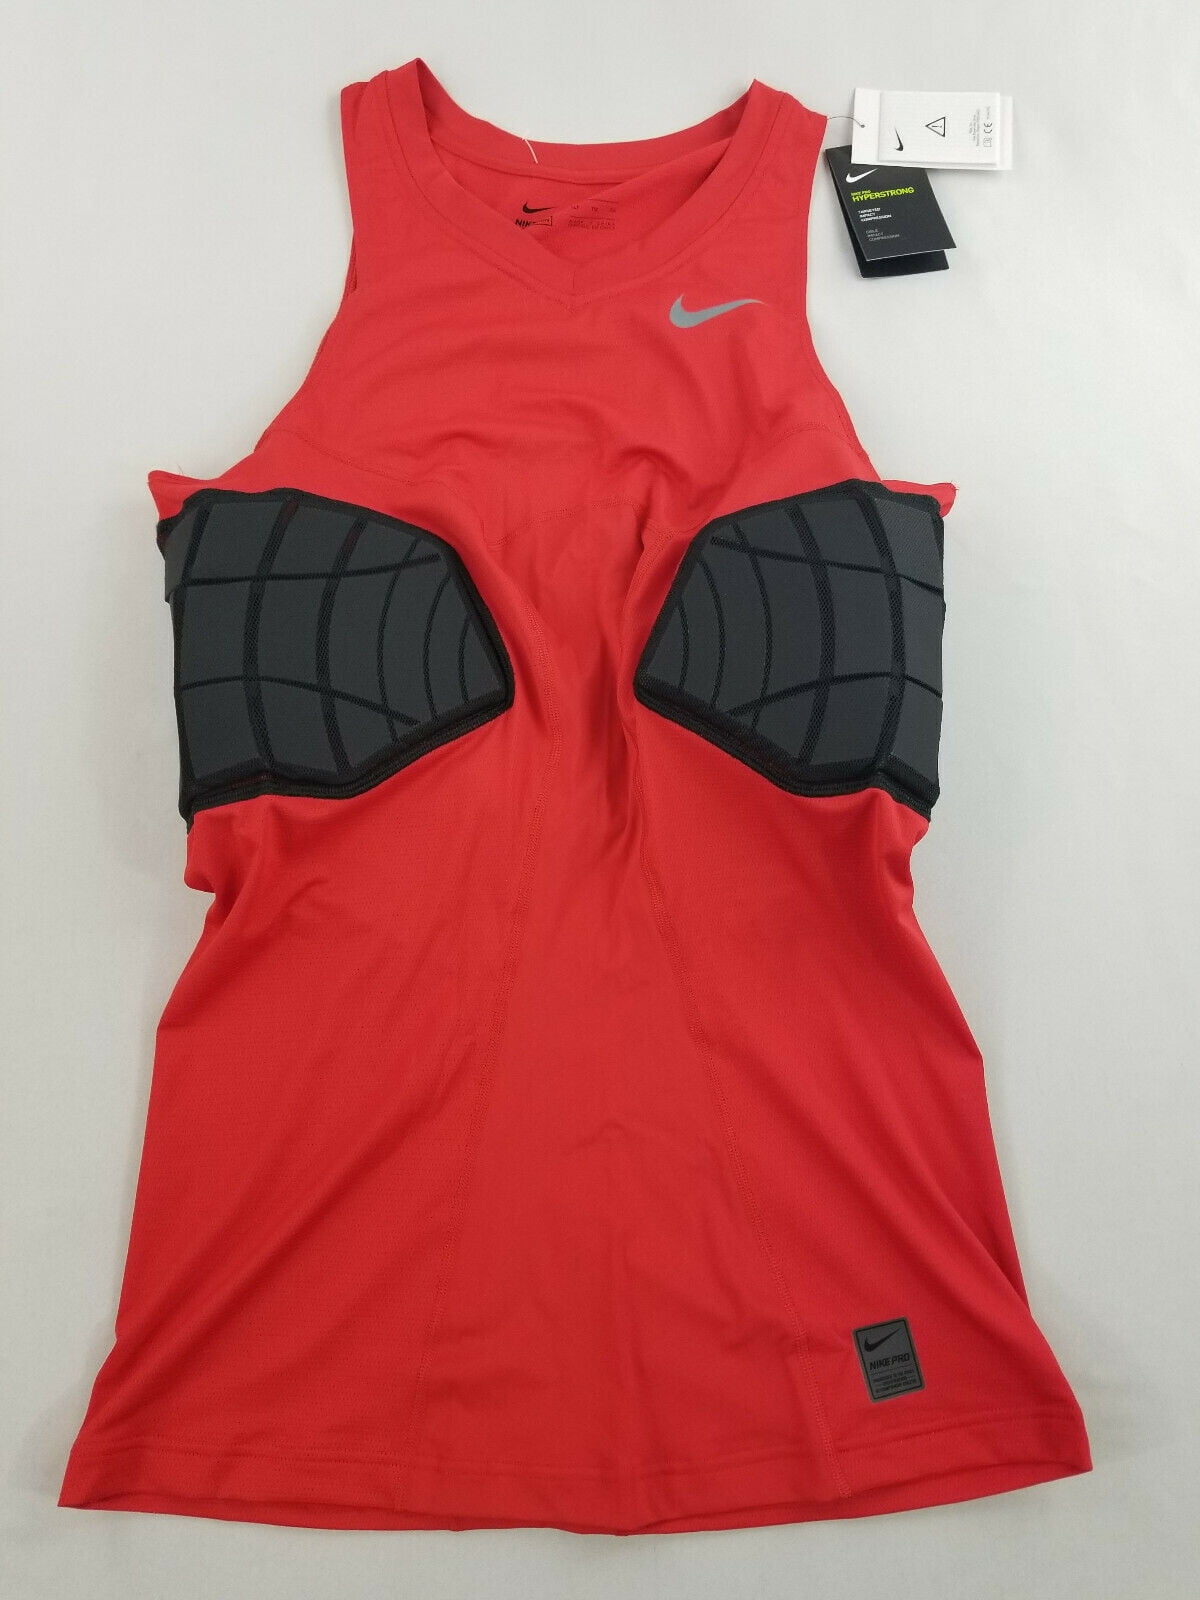 new Nike Pro Hyperstrong Top compression padded Zambia